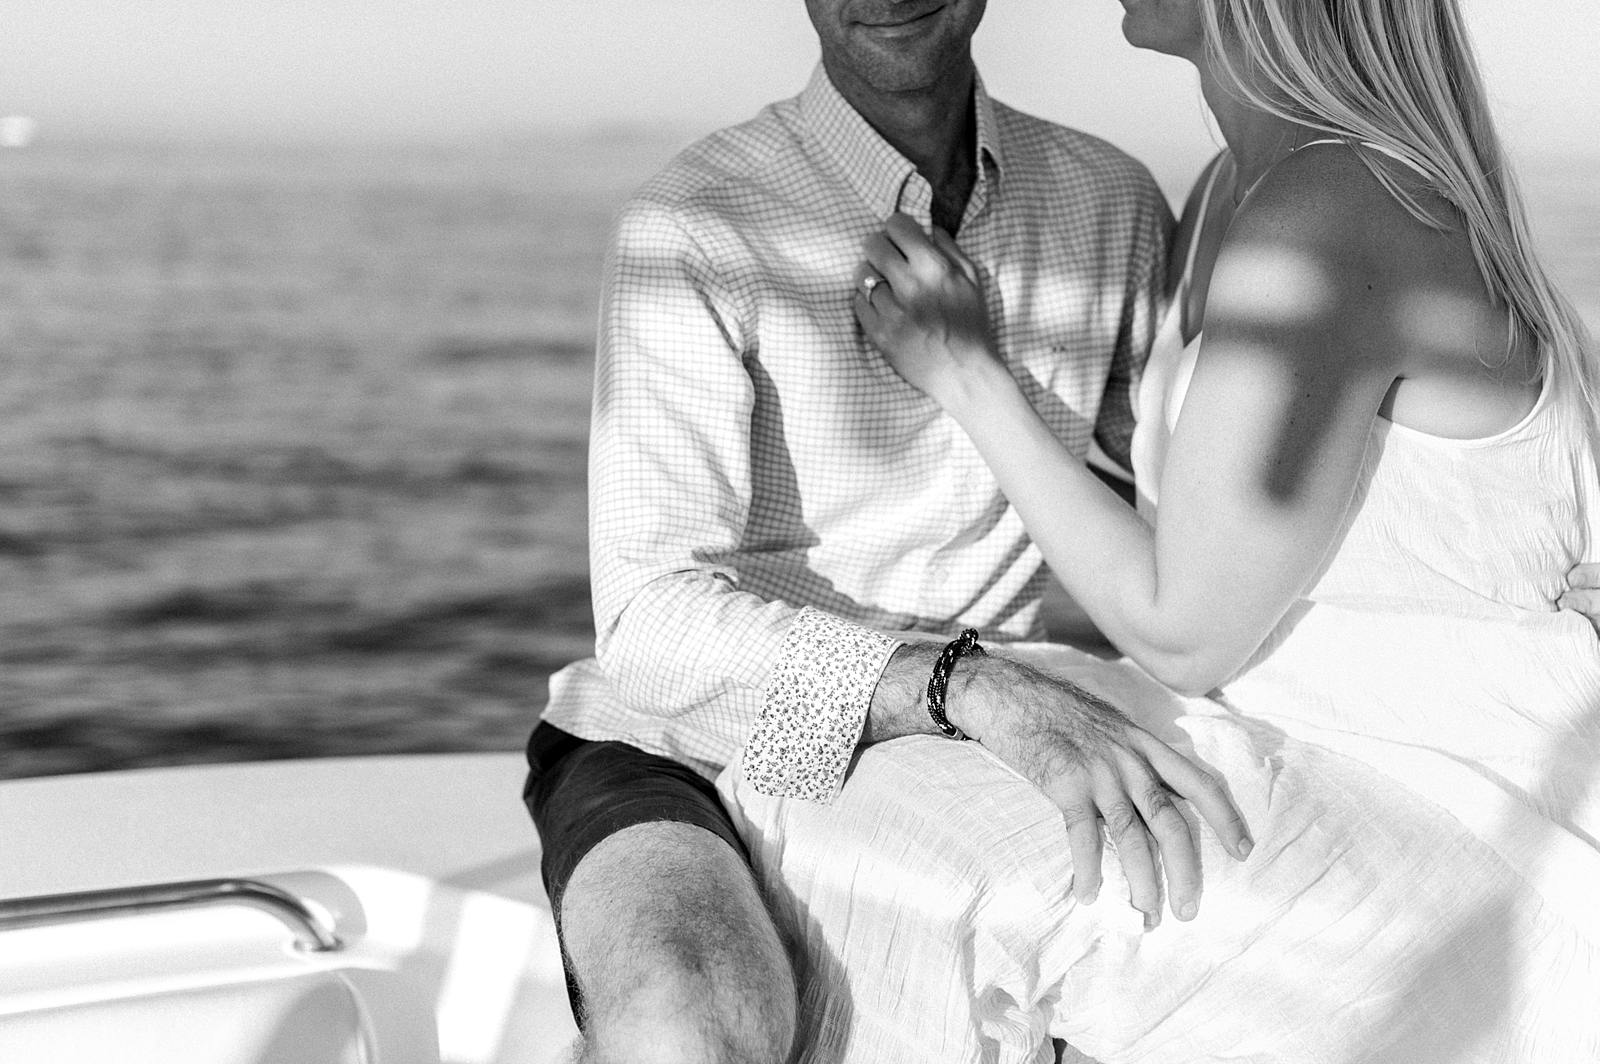 Eastern Yacht Club Engagement Session Photos in Marblehead, MA by Boston Wedding Photographer Annmarie Swift